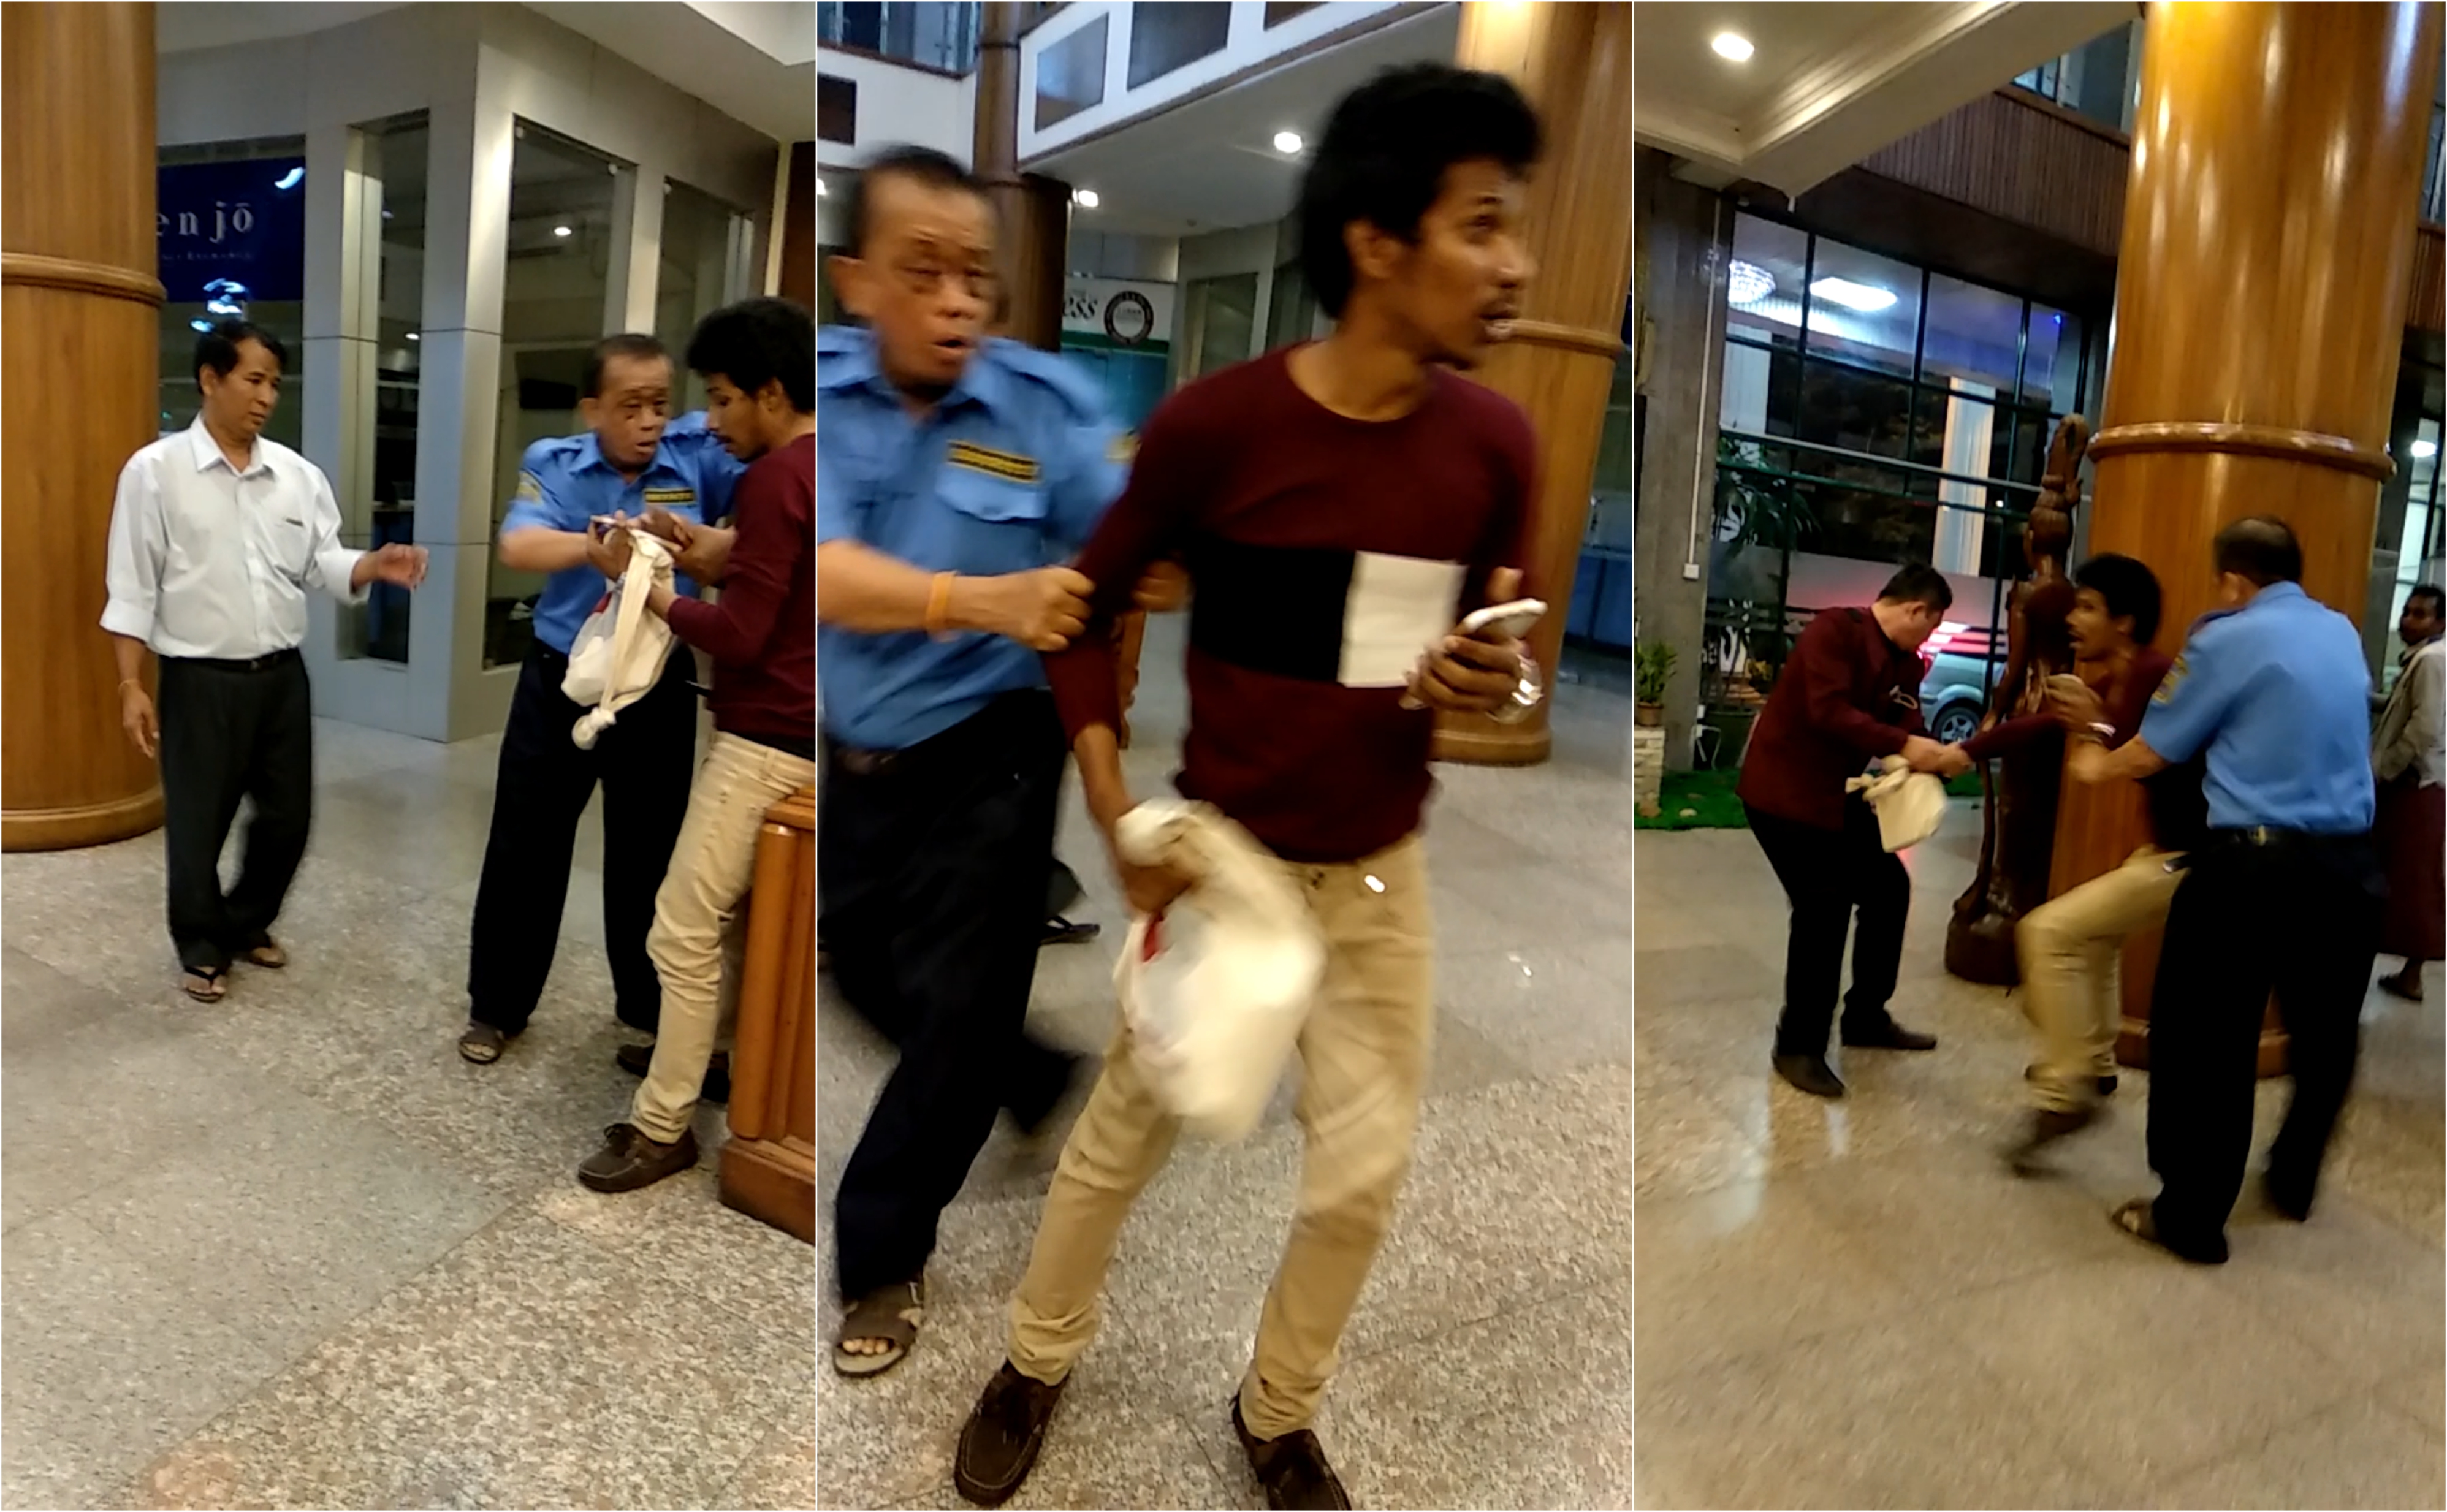 Stills from a bystander’s video showing hotel security staff removing Than Toe Aung from the Asia Plaza Hotel.